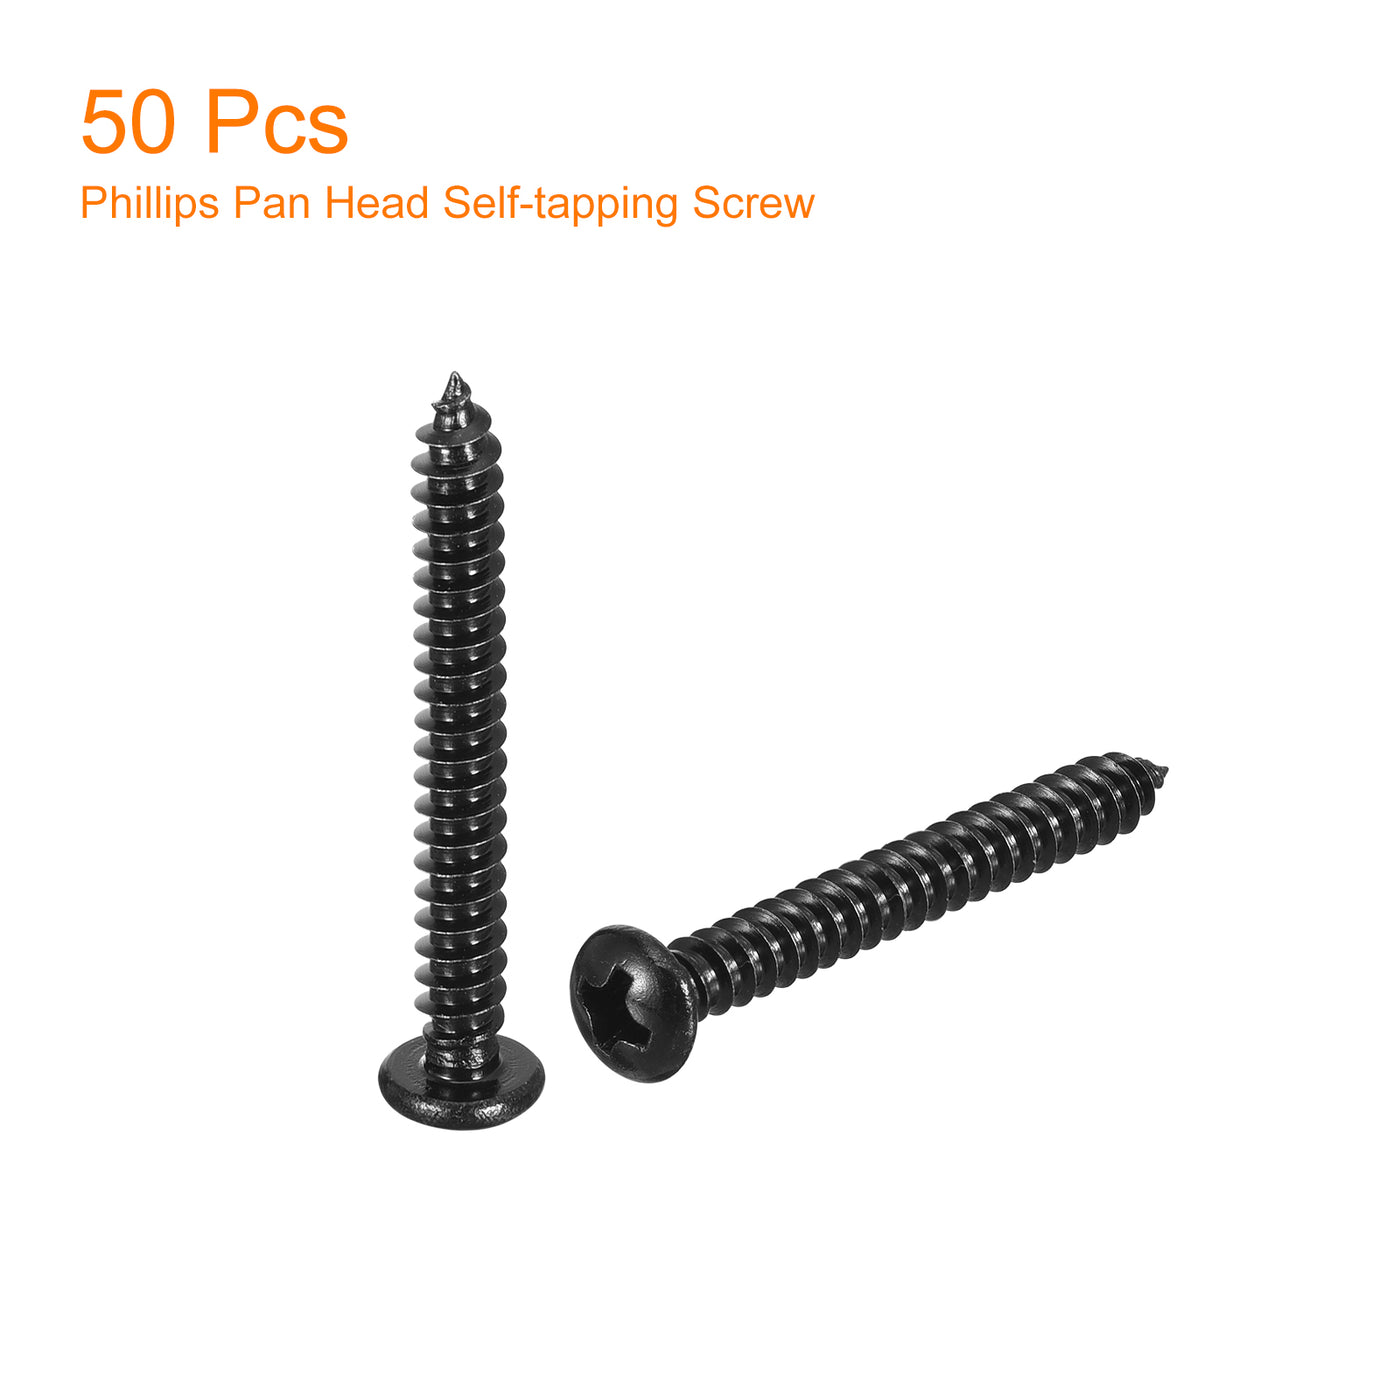 uxcell Uxcell #8 x 1-3/8" Phillips Pan Head Self-tapping Screw, 50pcs - 304 Stainless Steel Round Head Wood Screw Full Thread (Black)